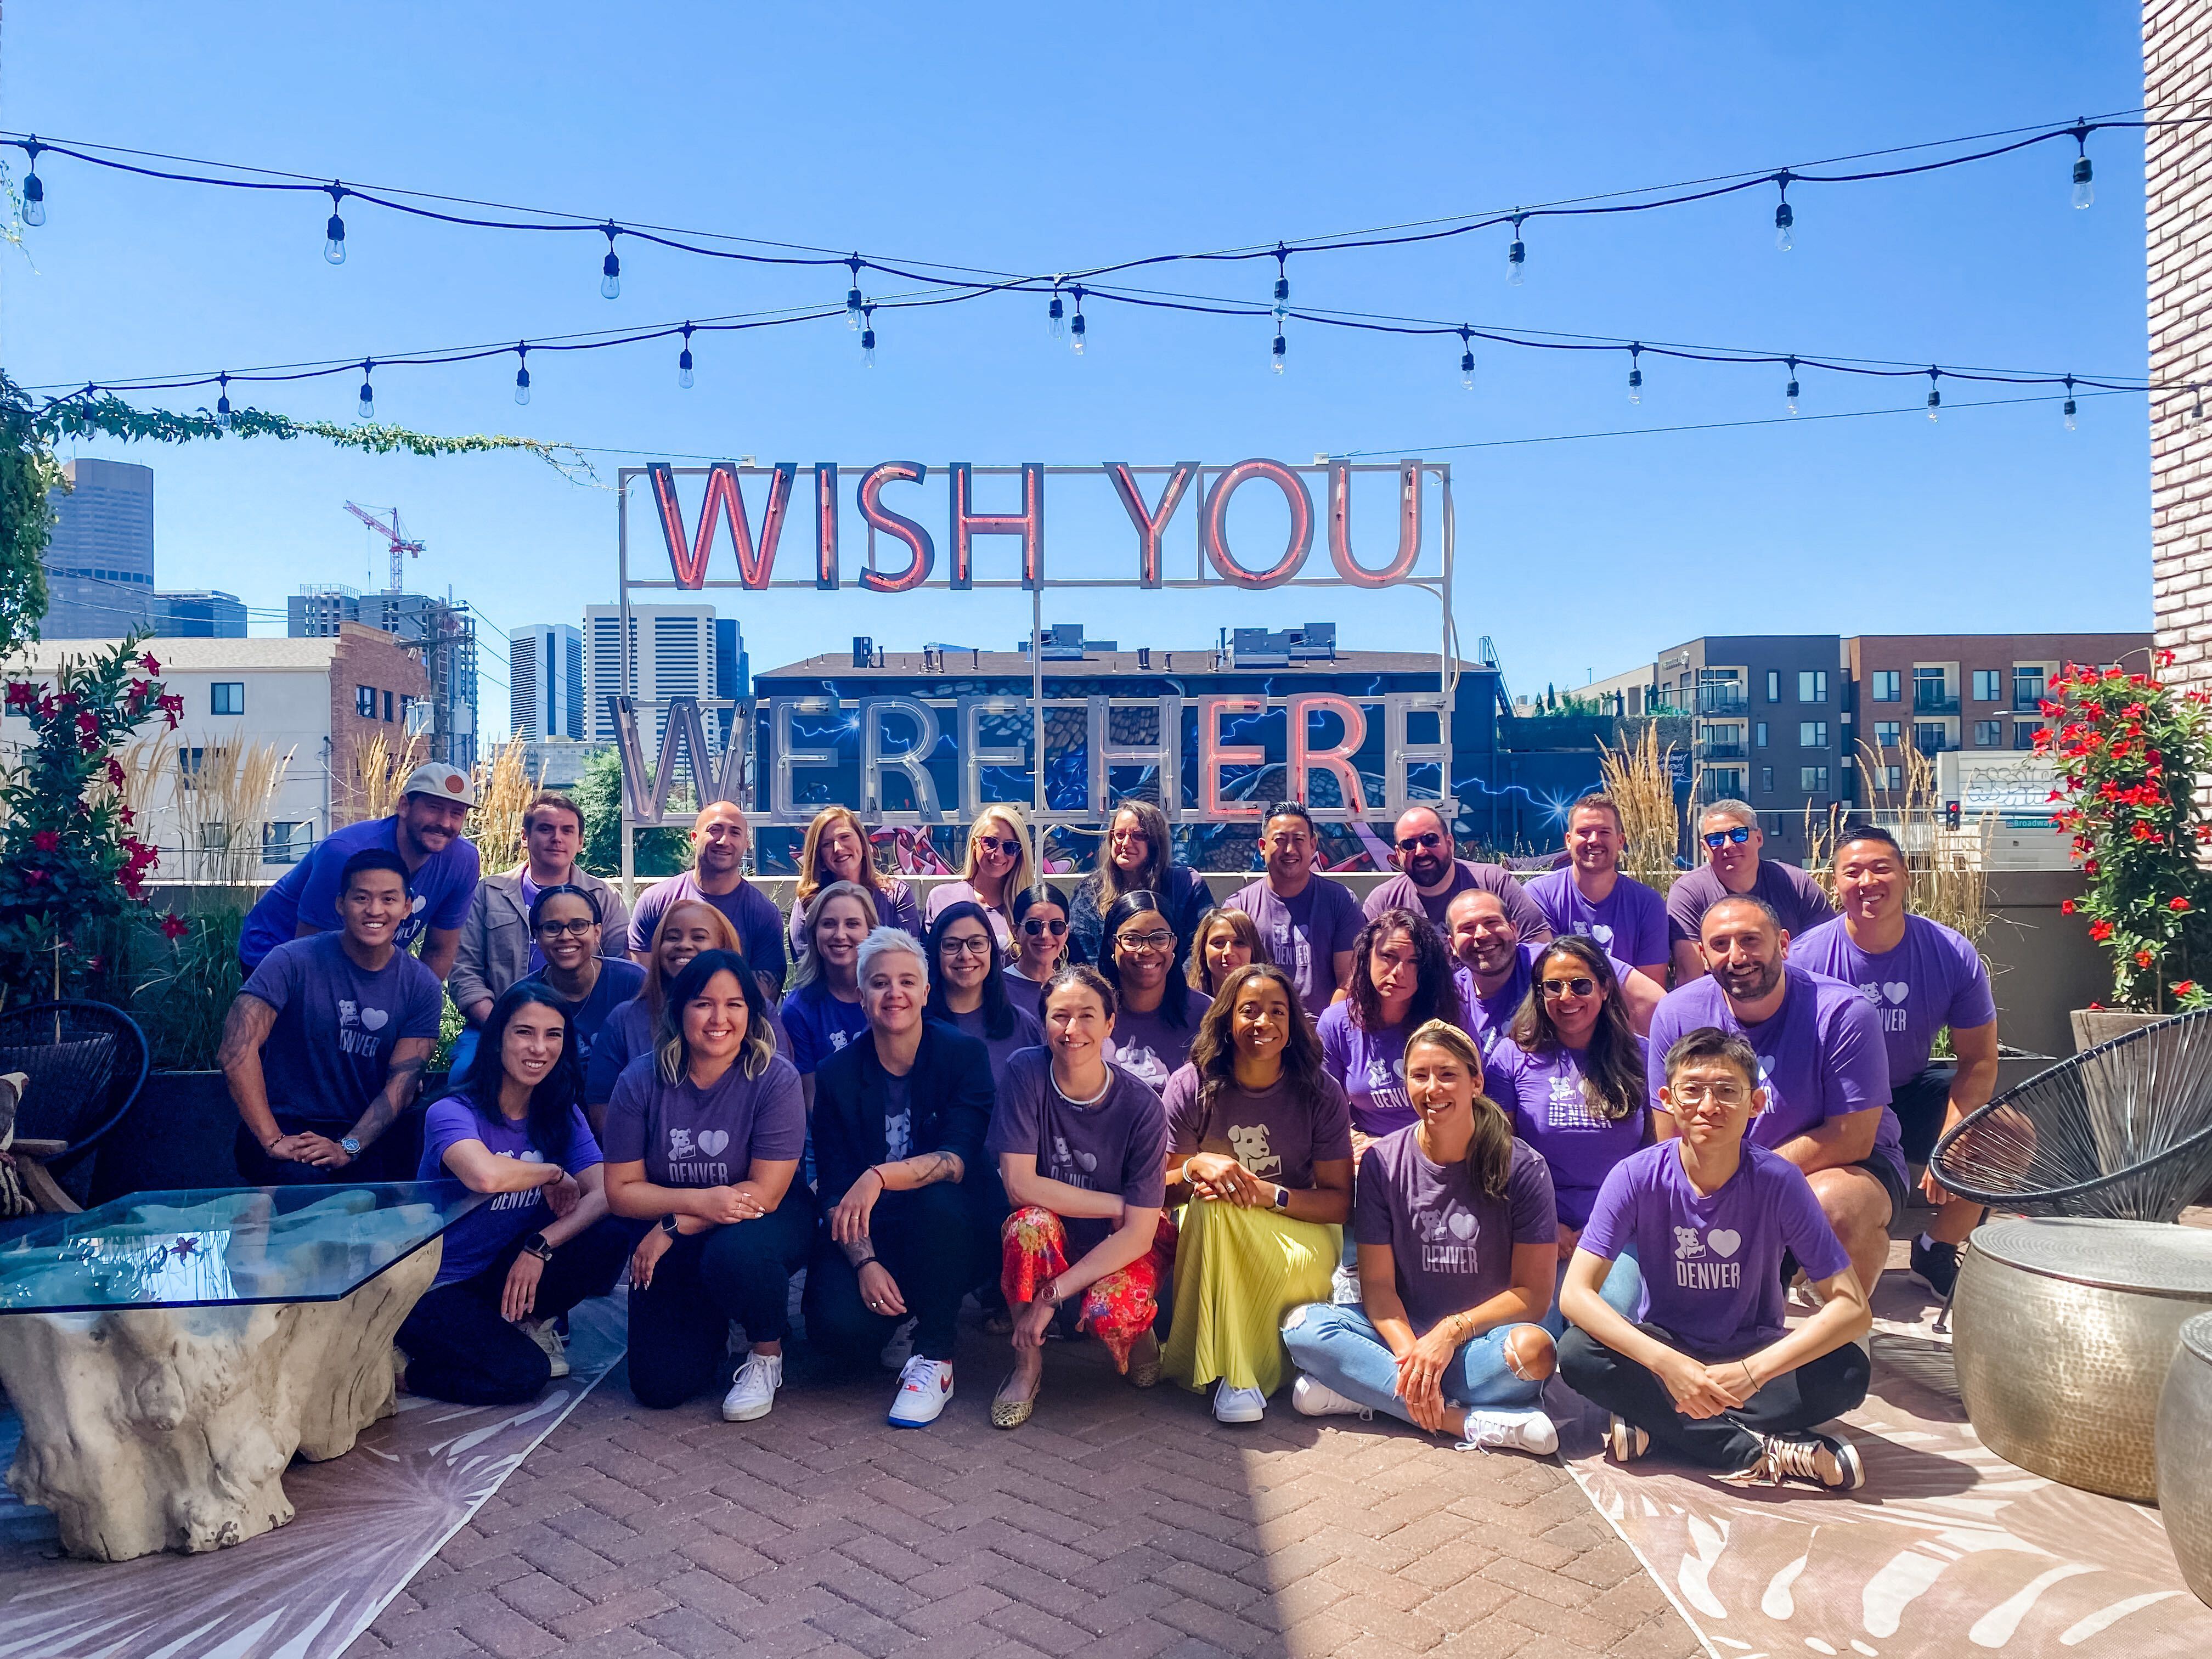 Datadog’s team members sit for a group photo on a rooftop deck with a sign behind them that reads “Wish you were here.”